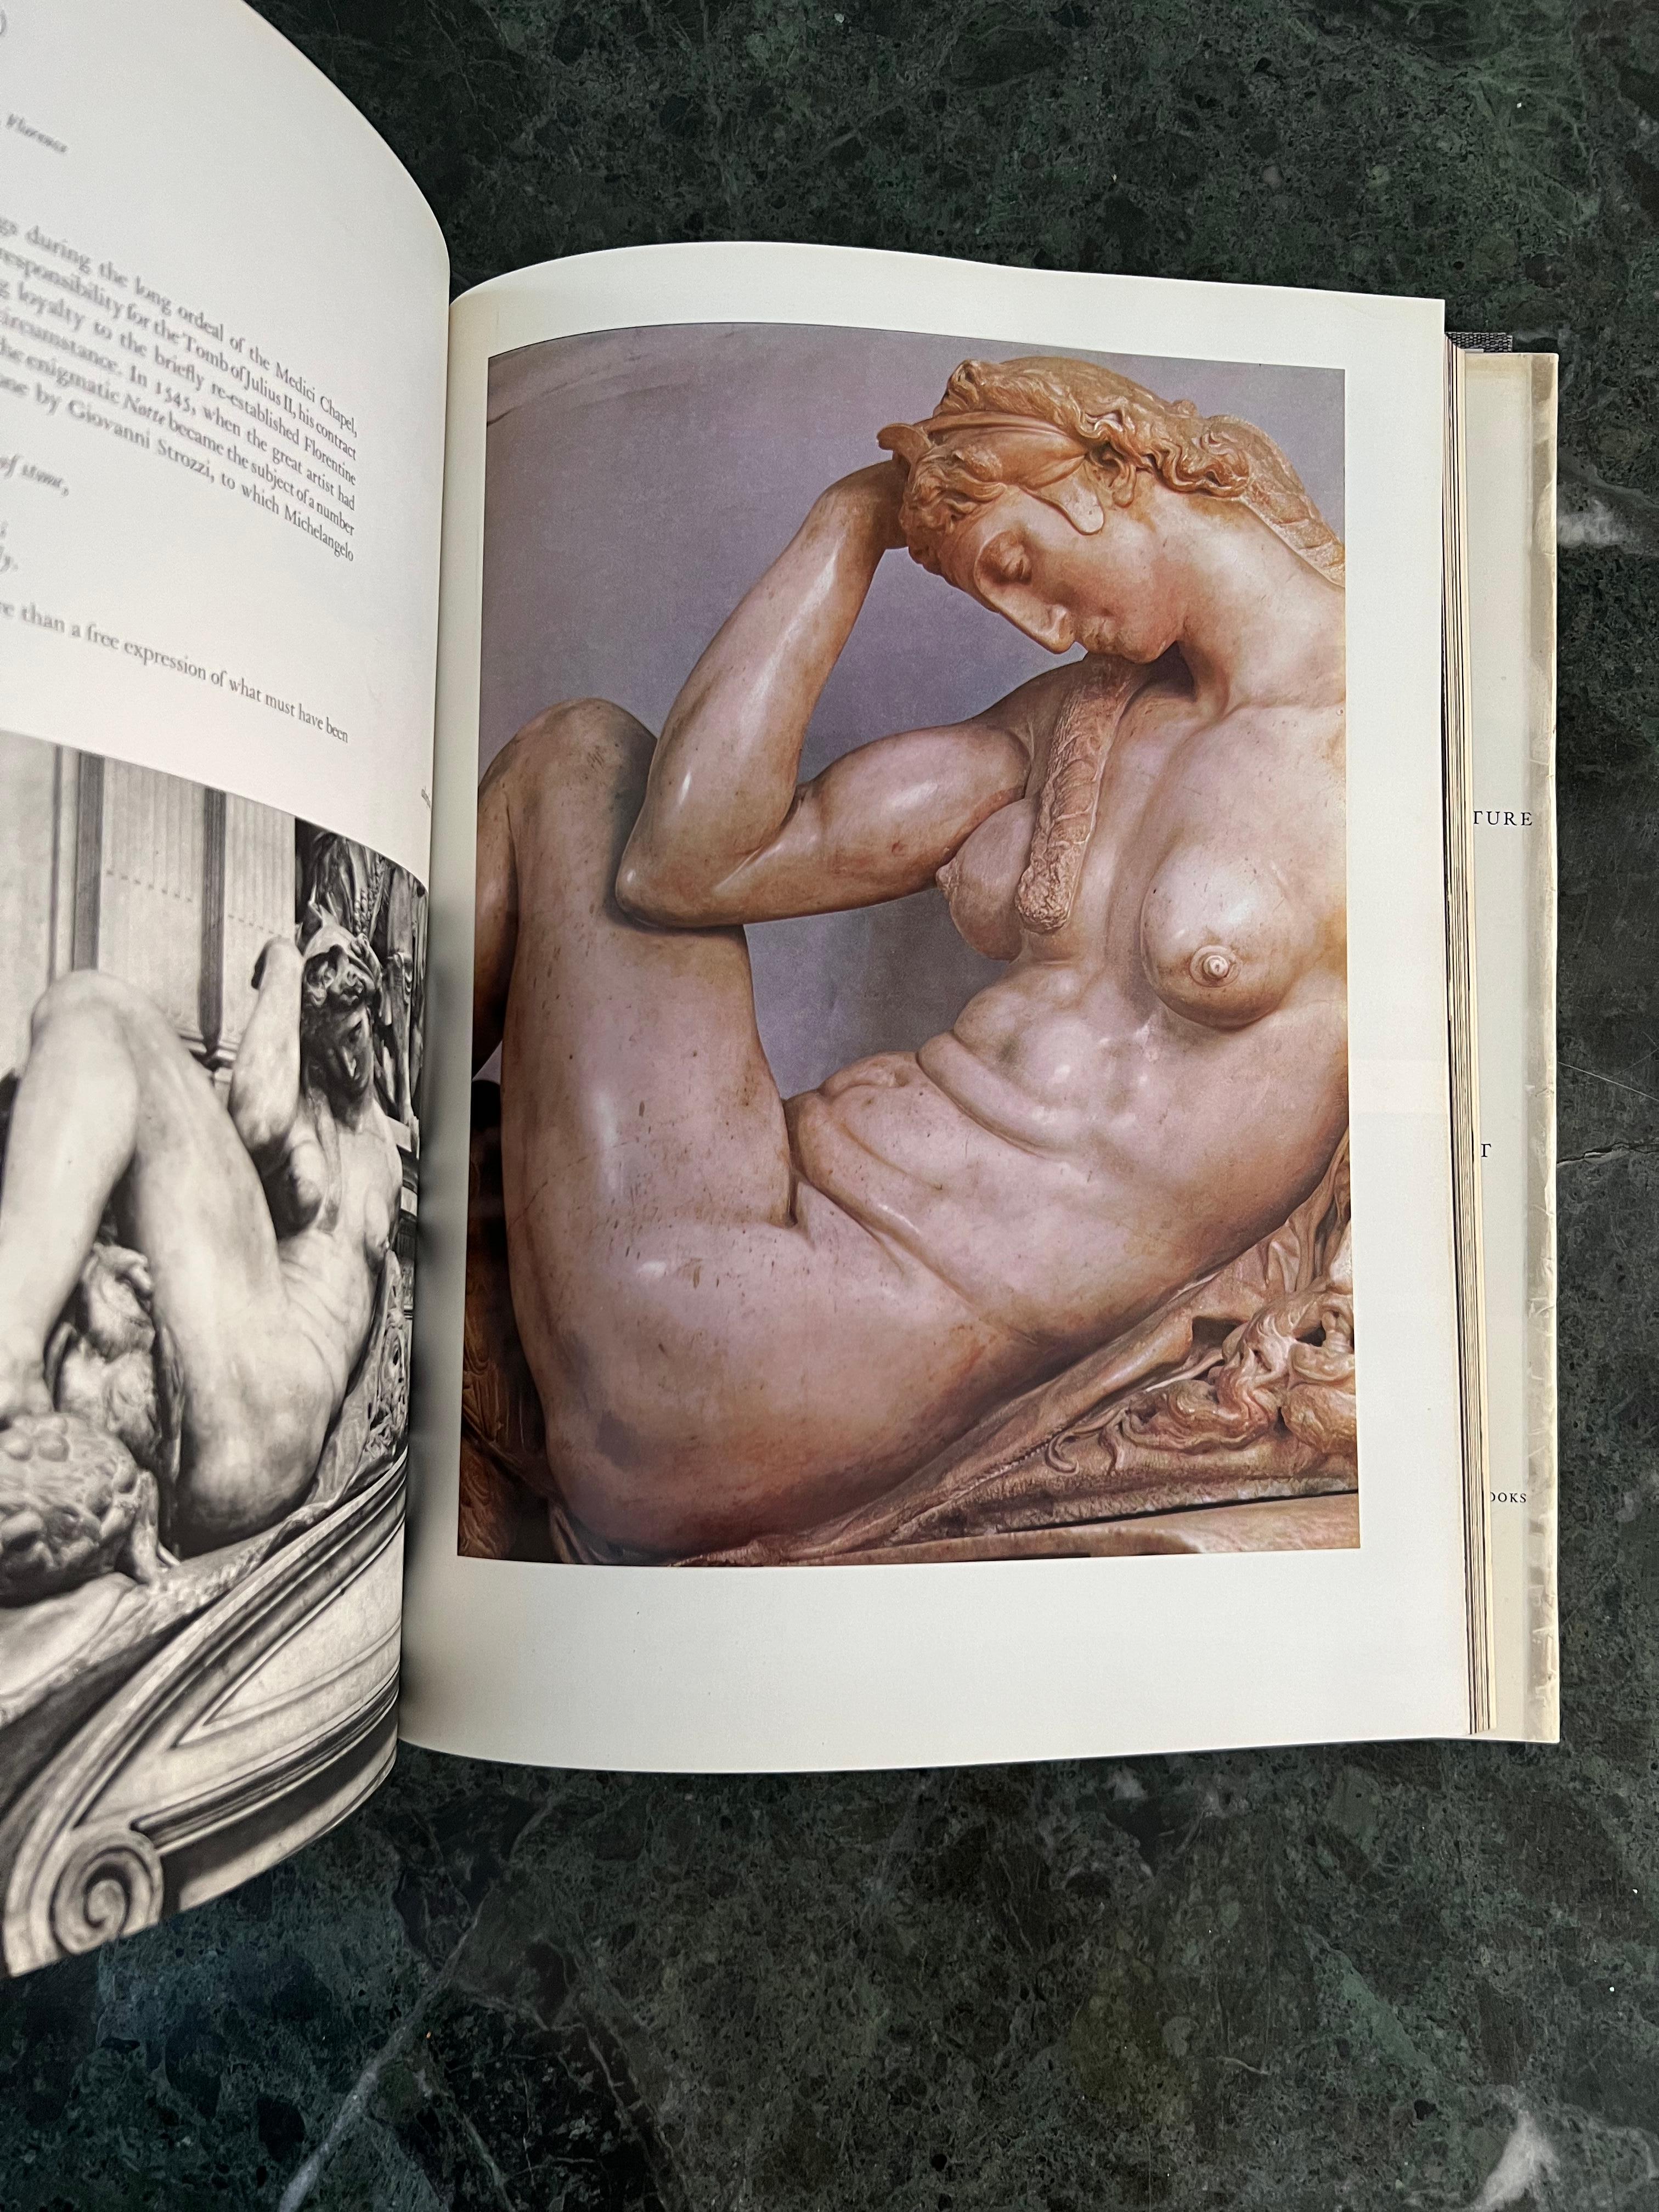 Large Collectible Art Book “Michelangelo: The Complete Sculpture”, 1982 For Sale 5